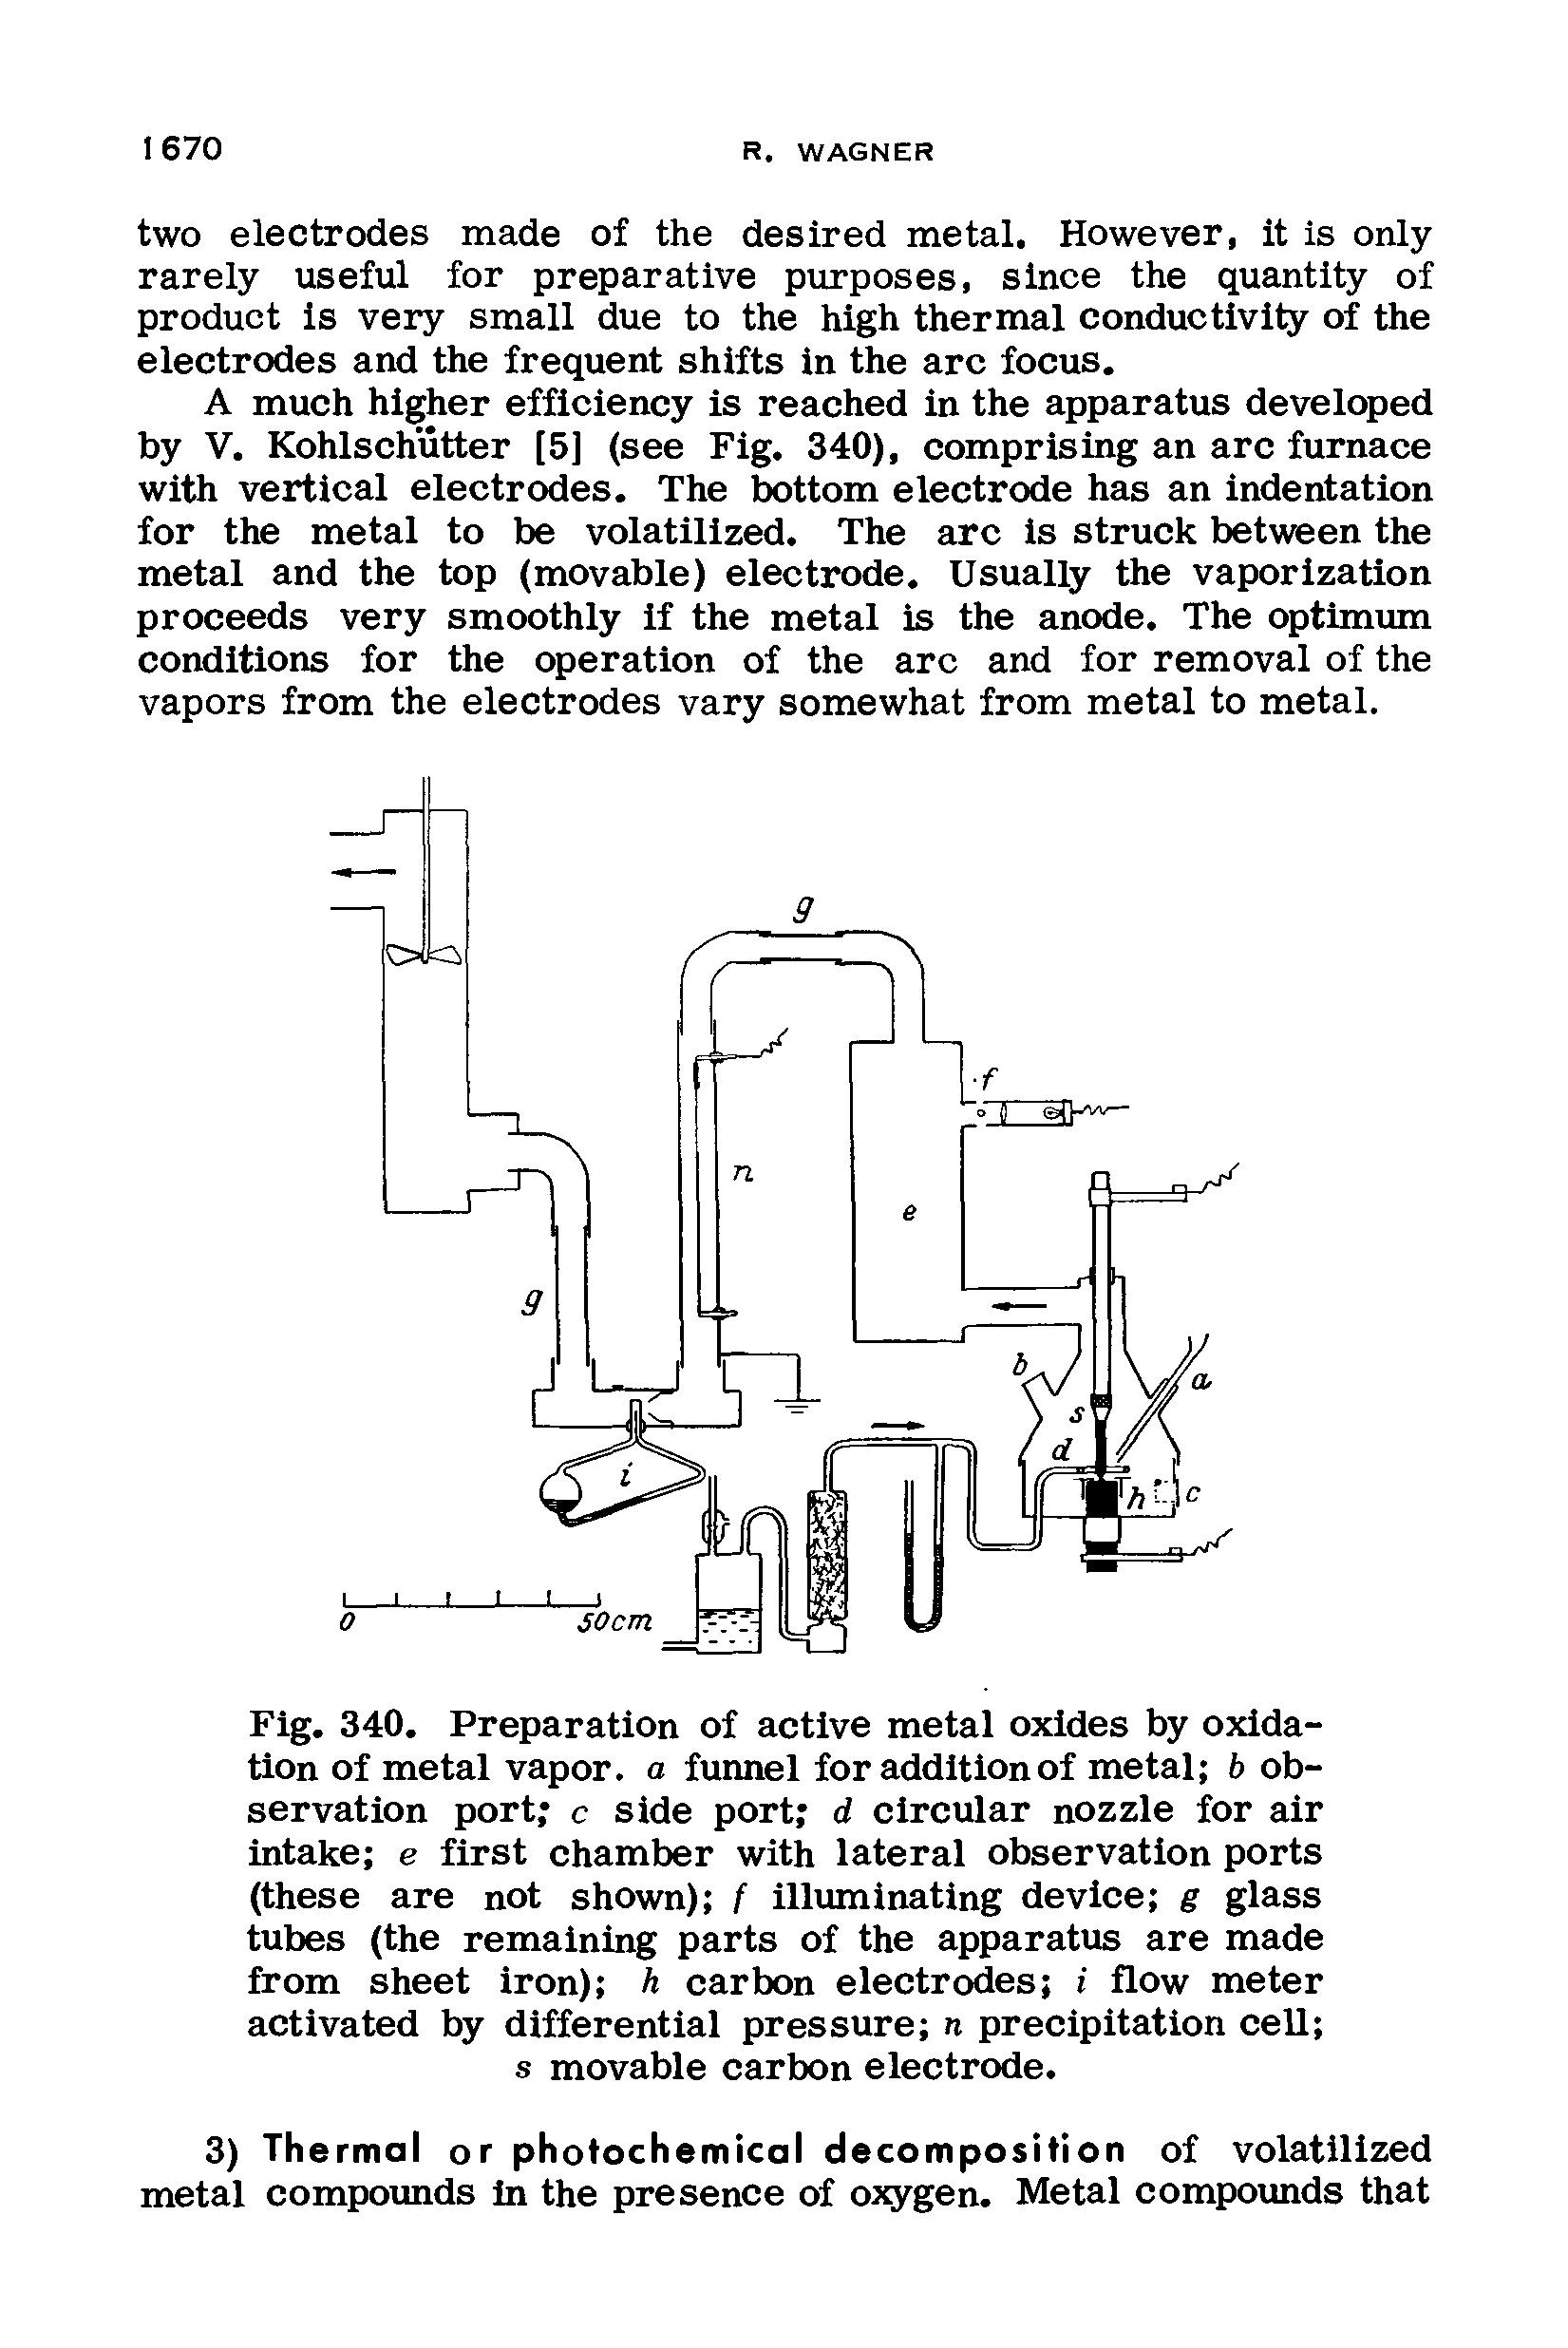 Fig. 340. Preparation of active metal oxides by oxidation of metal vapor, a funnel for addition of metal b observation port c side port d circular nozzle for air intake e first chamber with lateral observation ports (these are not shown) f illuminating device g glass tubes (the remaining parts of the apparatus are made from sheet iron) h carbon electrodes i flow meter activated by differential pressure n precipitation cell s movable carbon electrode.